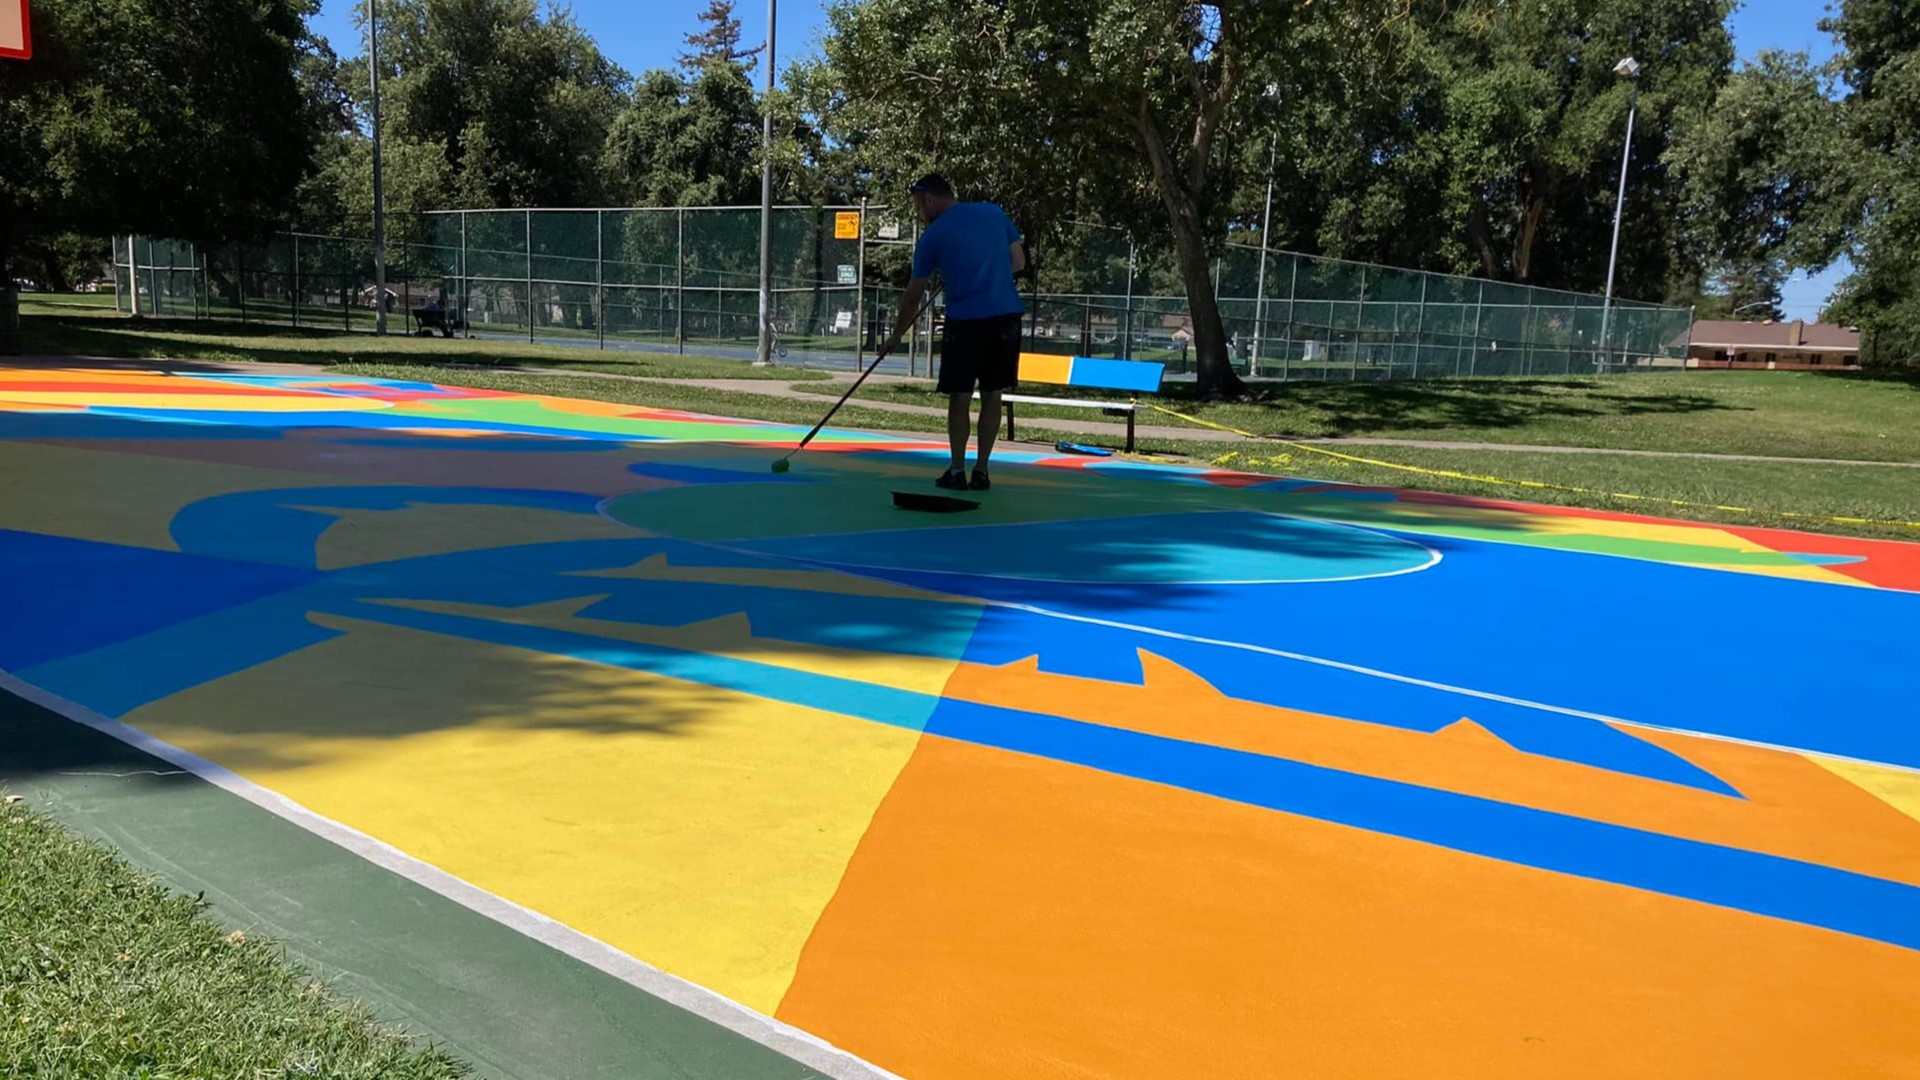 Nationally renowned mural artist and world record holder Jason Tetlak is turning the basketball court at Dentoni Park in Stockton into a colorful playground.